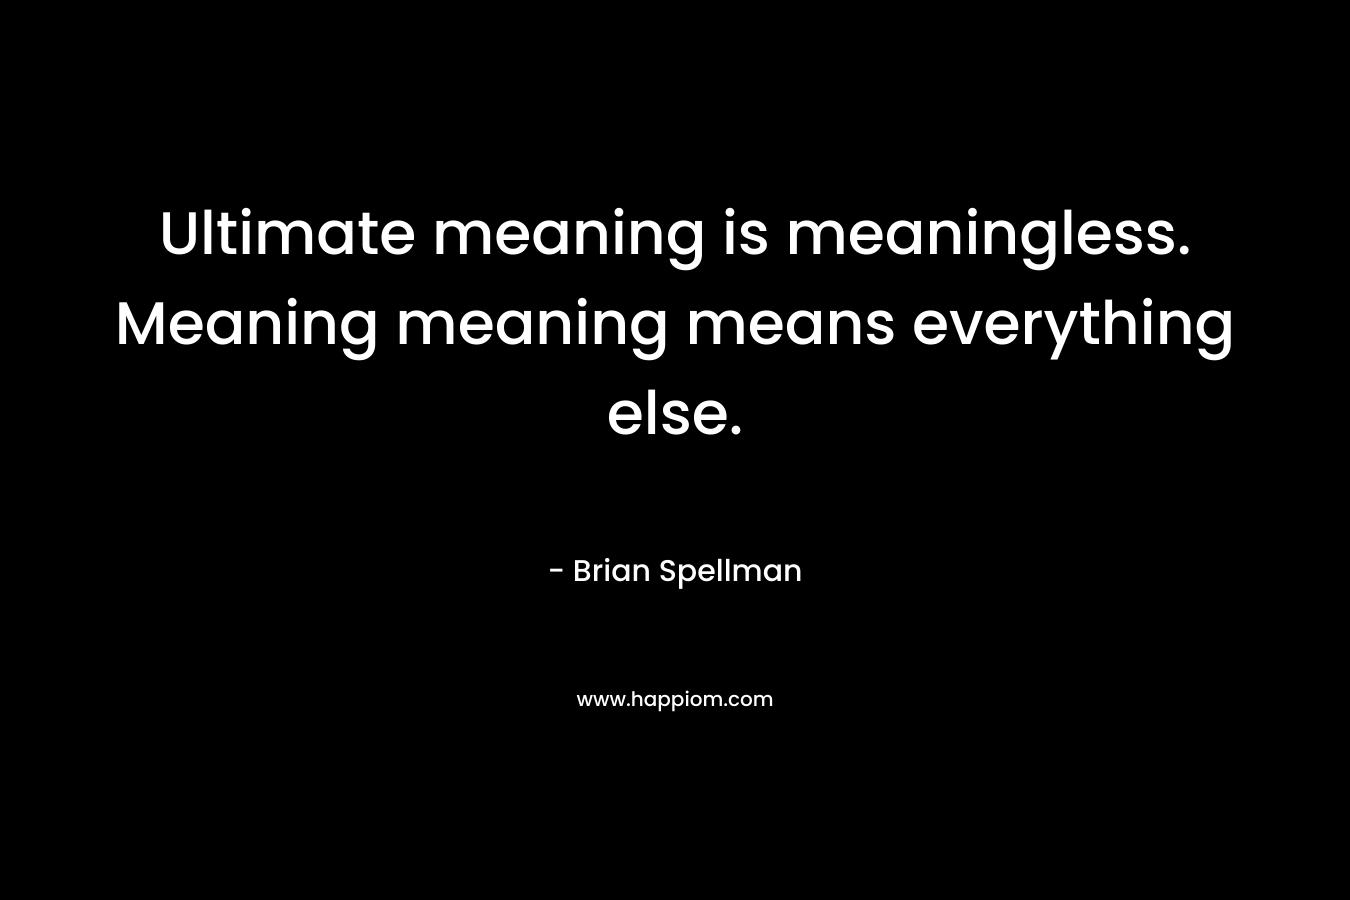 Ultimate meaning is meaningless. Meaning meaning means everything else.